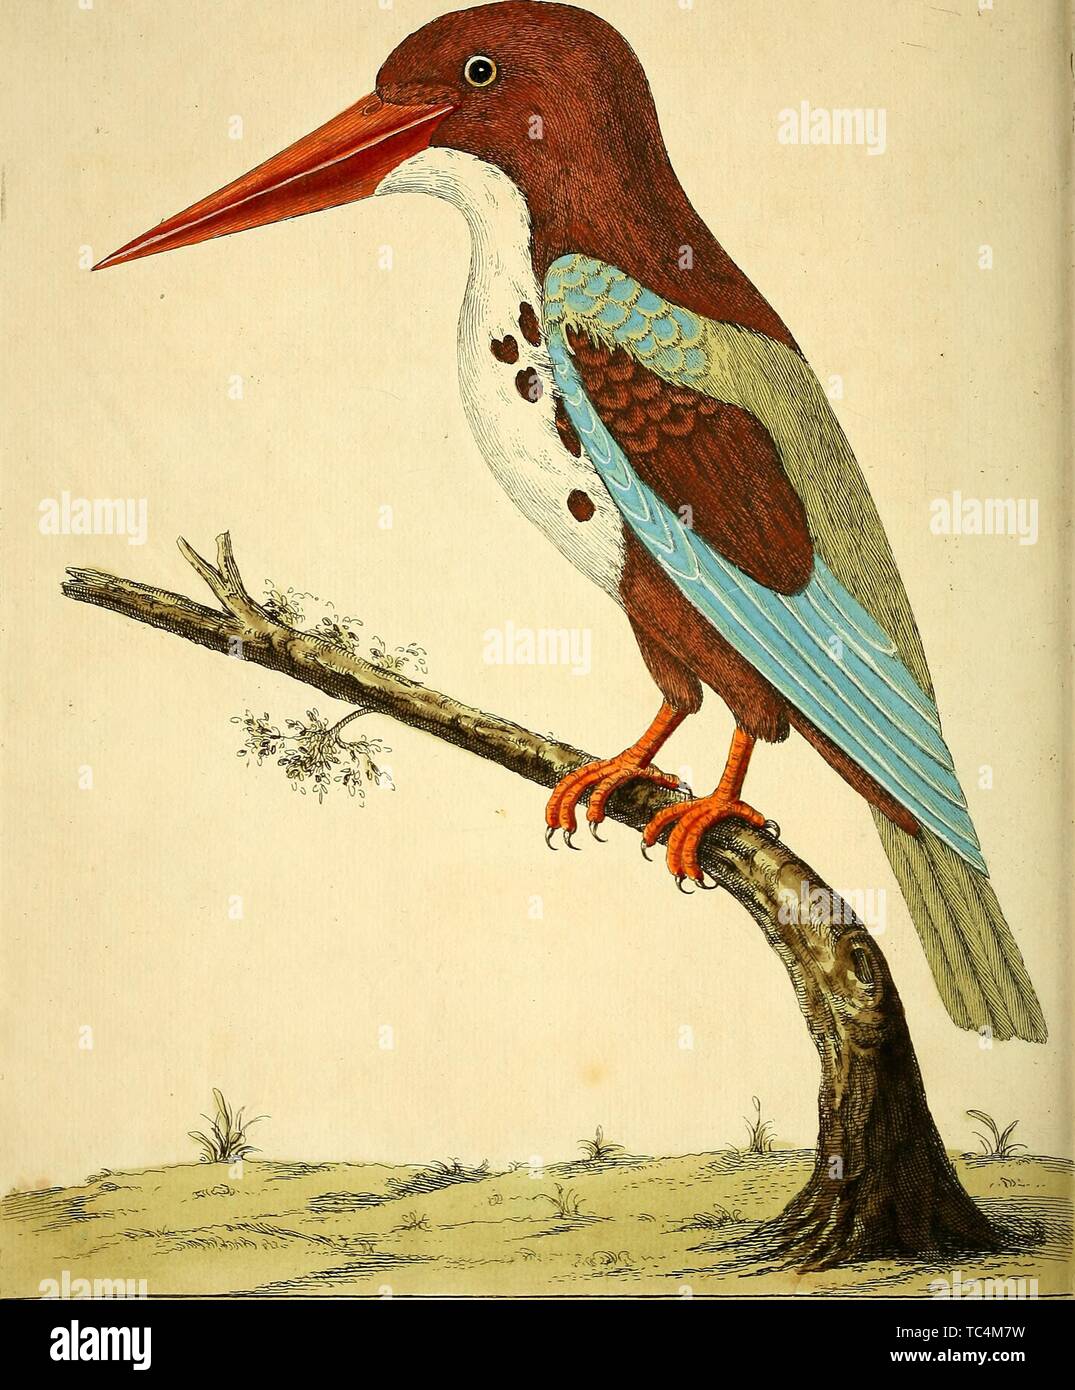 Engraving of the Bengal Kingfisher (Alcedo Major Bengalensis), from the book 'A natural history of birds' by Eleazar Albin, William Derham, and Jonathan Dwight, 1731. Courtesy Internet Archive. () Stock Photo